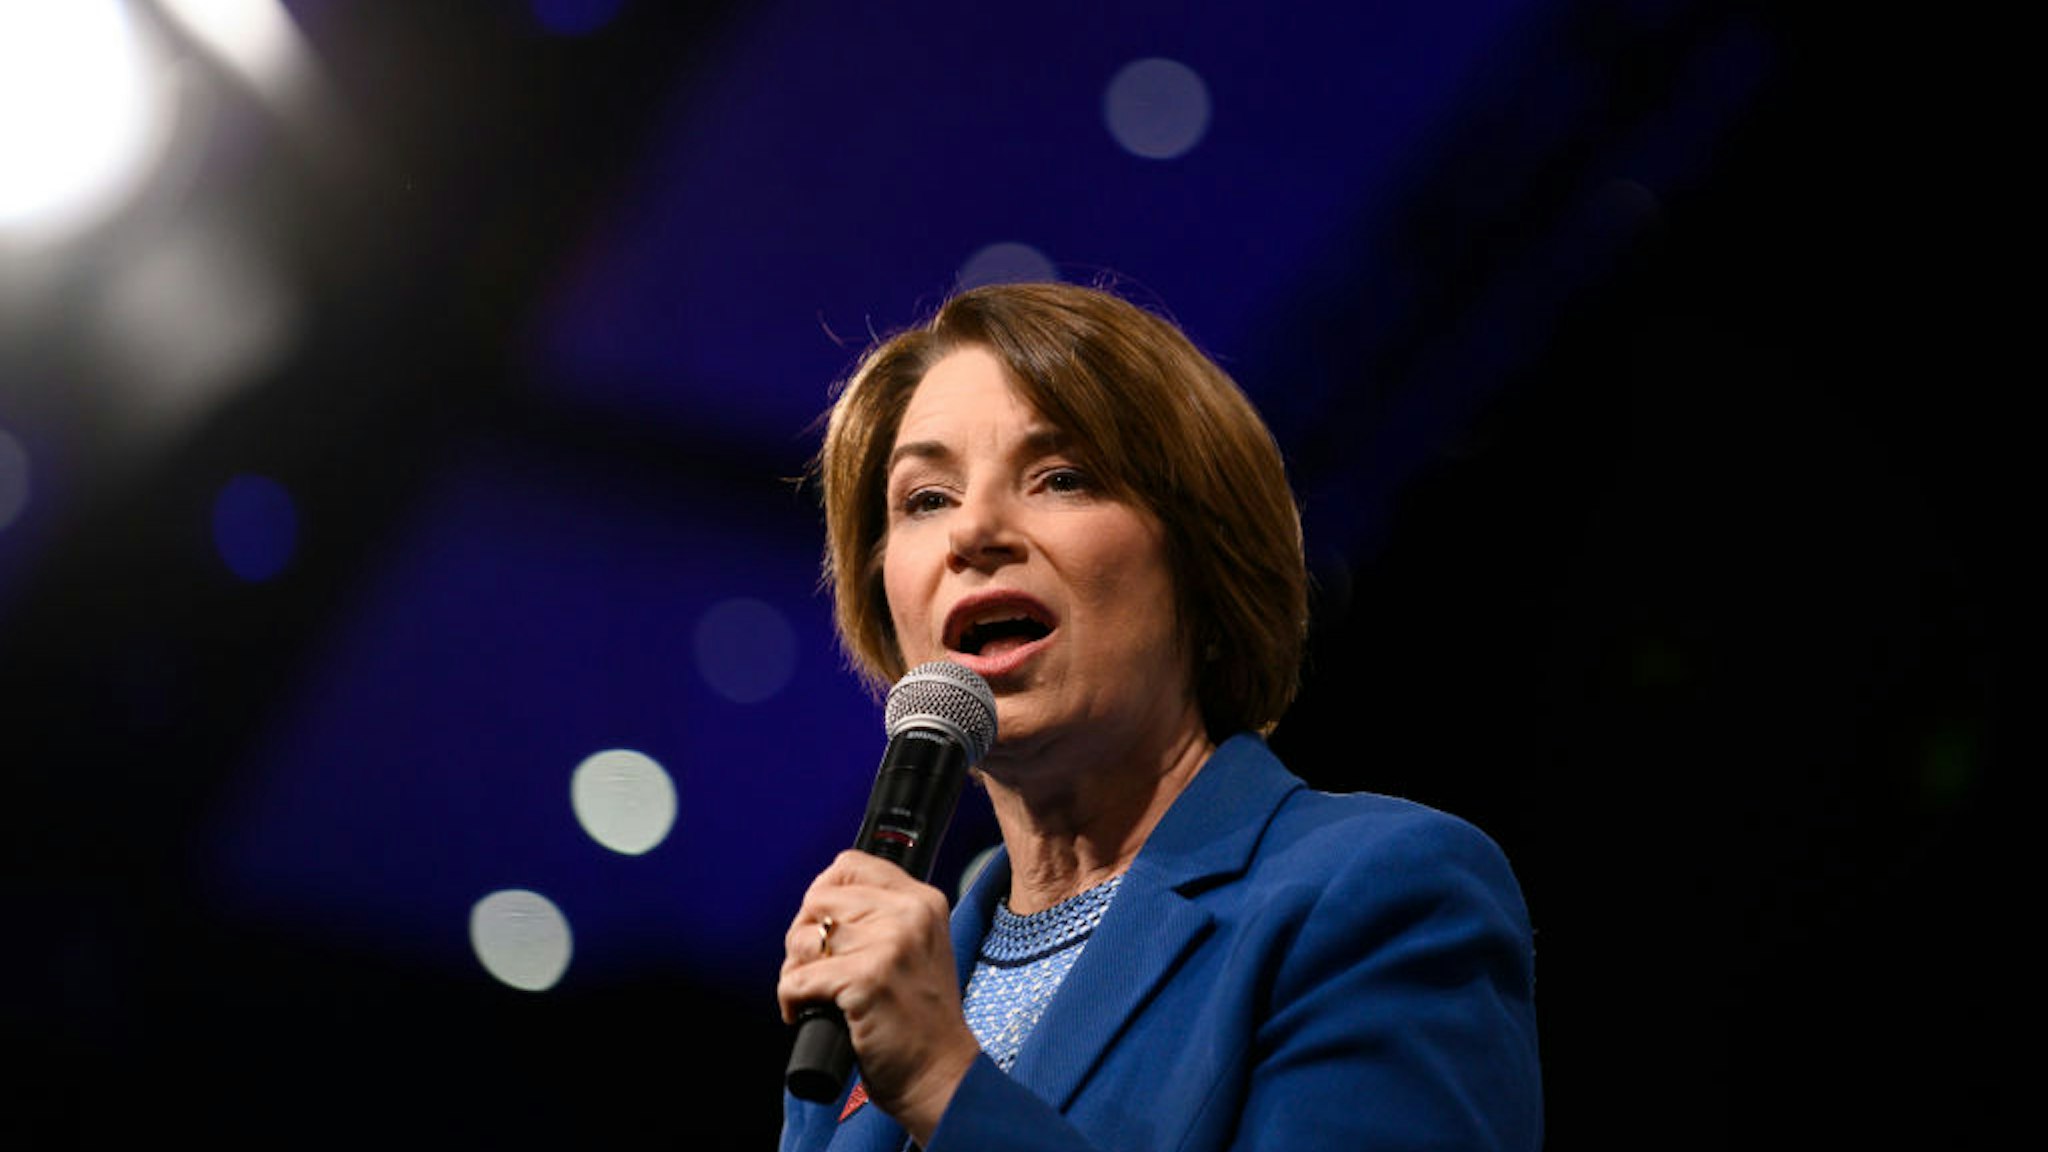 Amy Klobuchar speaks on stage during a forum on gun safety at the Iowa Events Center